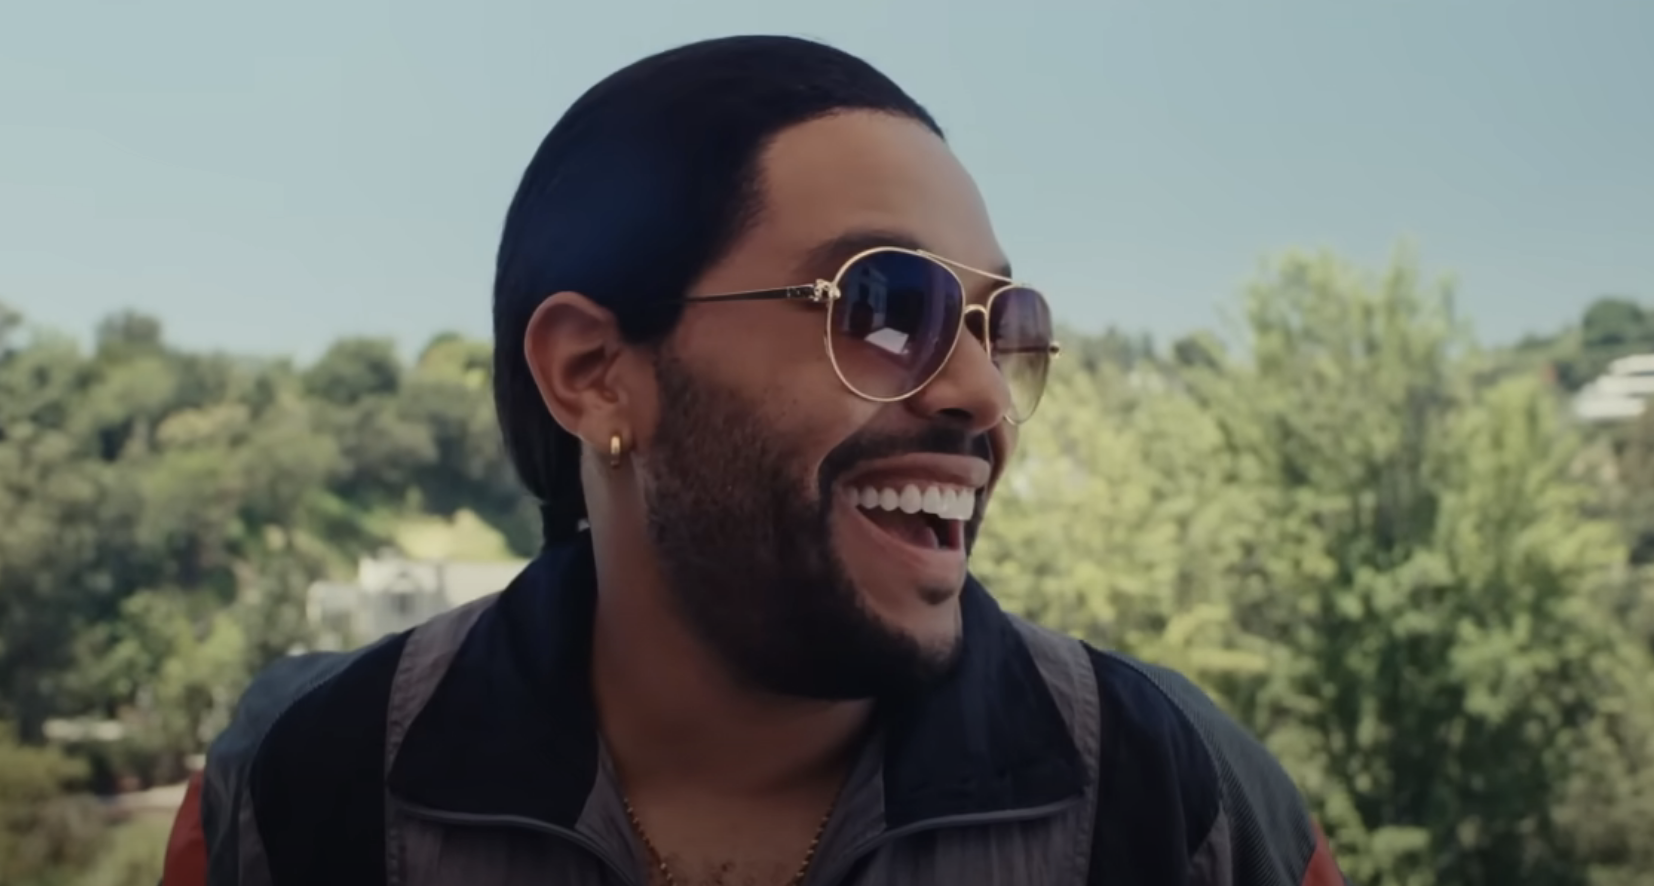 A closeup of The Weeknd wearing sunglasses and smiling widely in a scene from the show